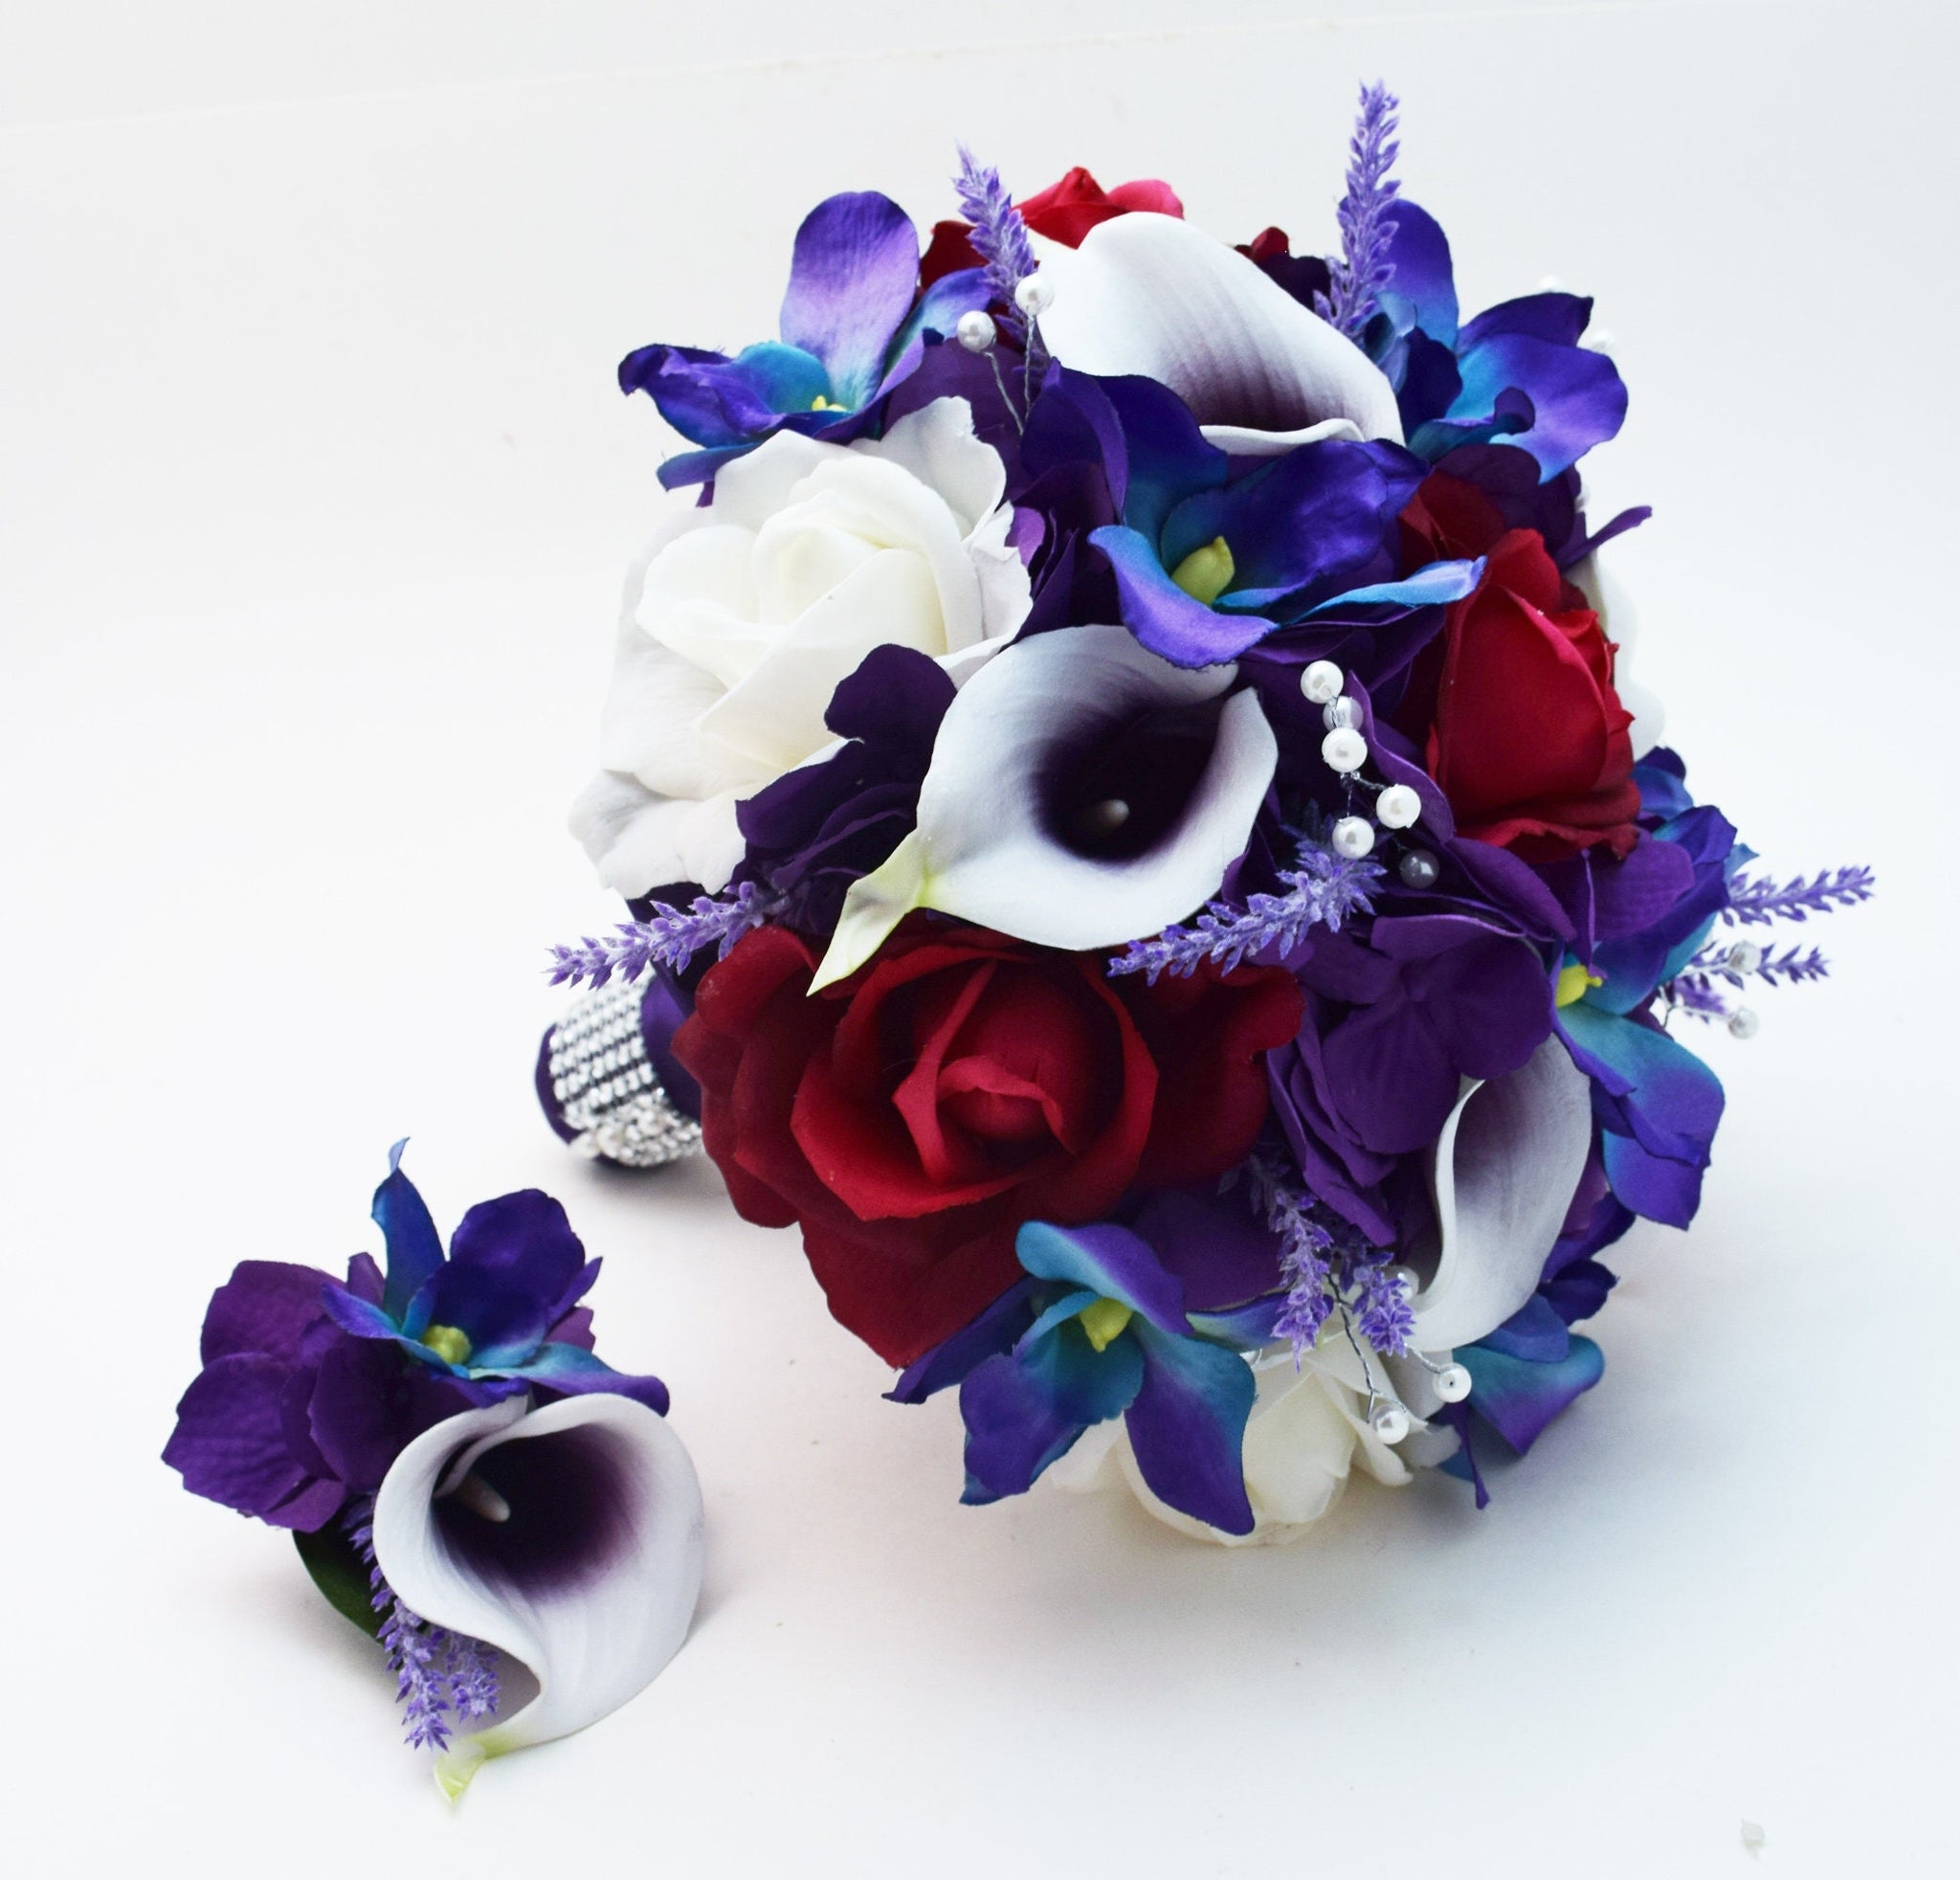 Galaxy Blue Orchid Callas Burgundy Roses Bridal or Bridesmaid Bouquet - add a Groom's or Groomsmen Boutonniere Wedding Centerpiece & More!